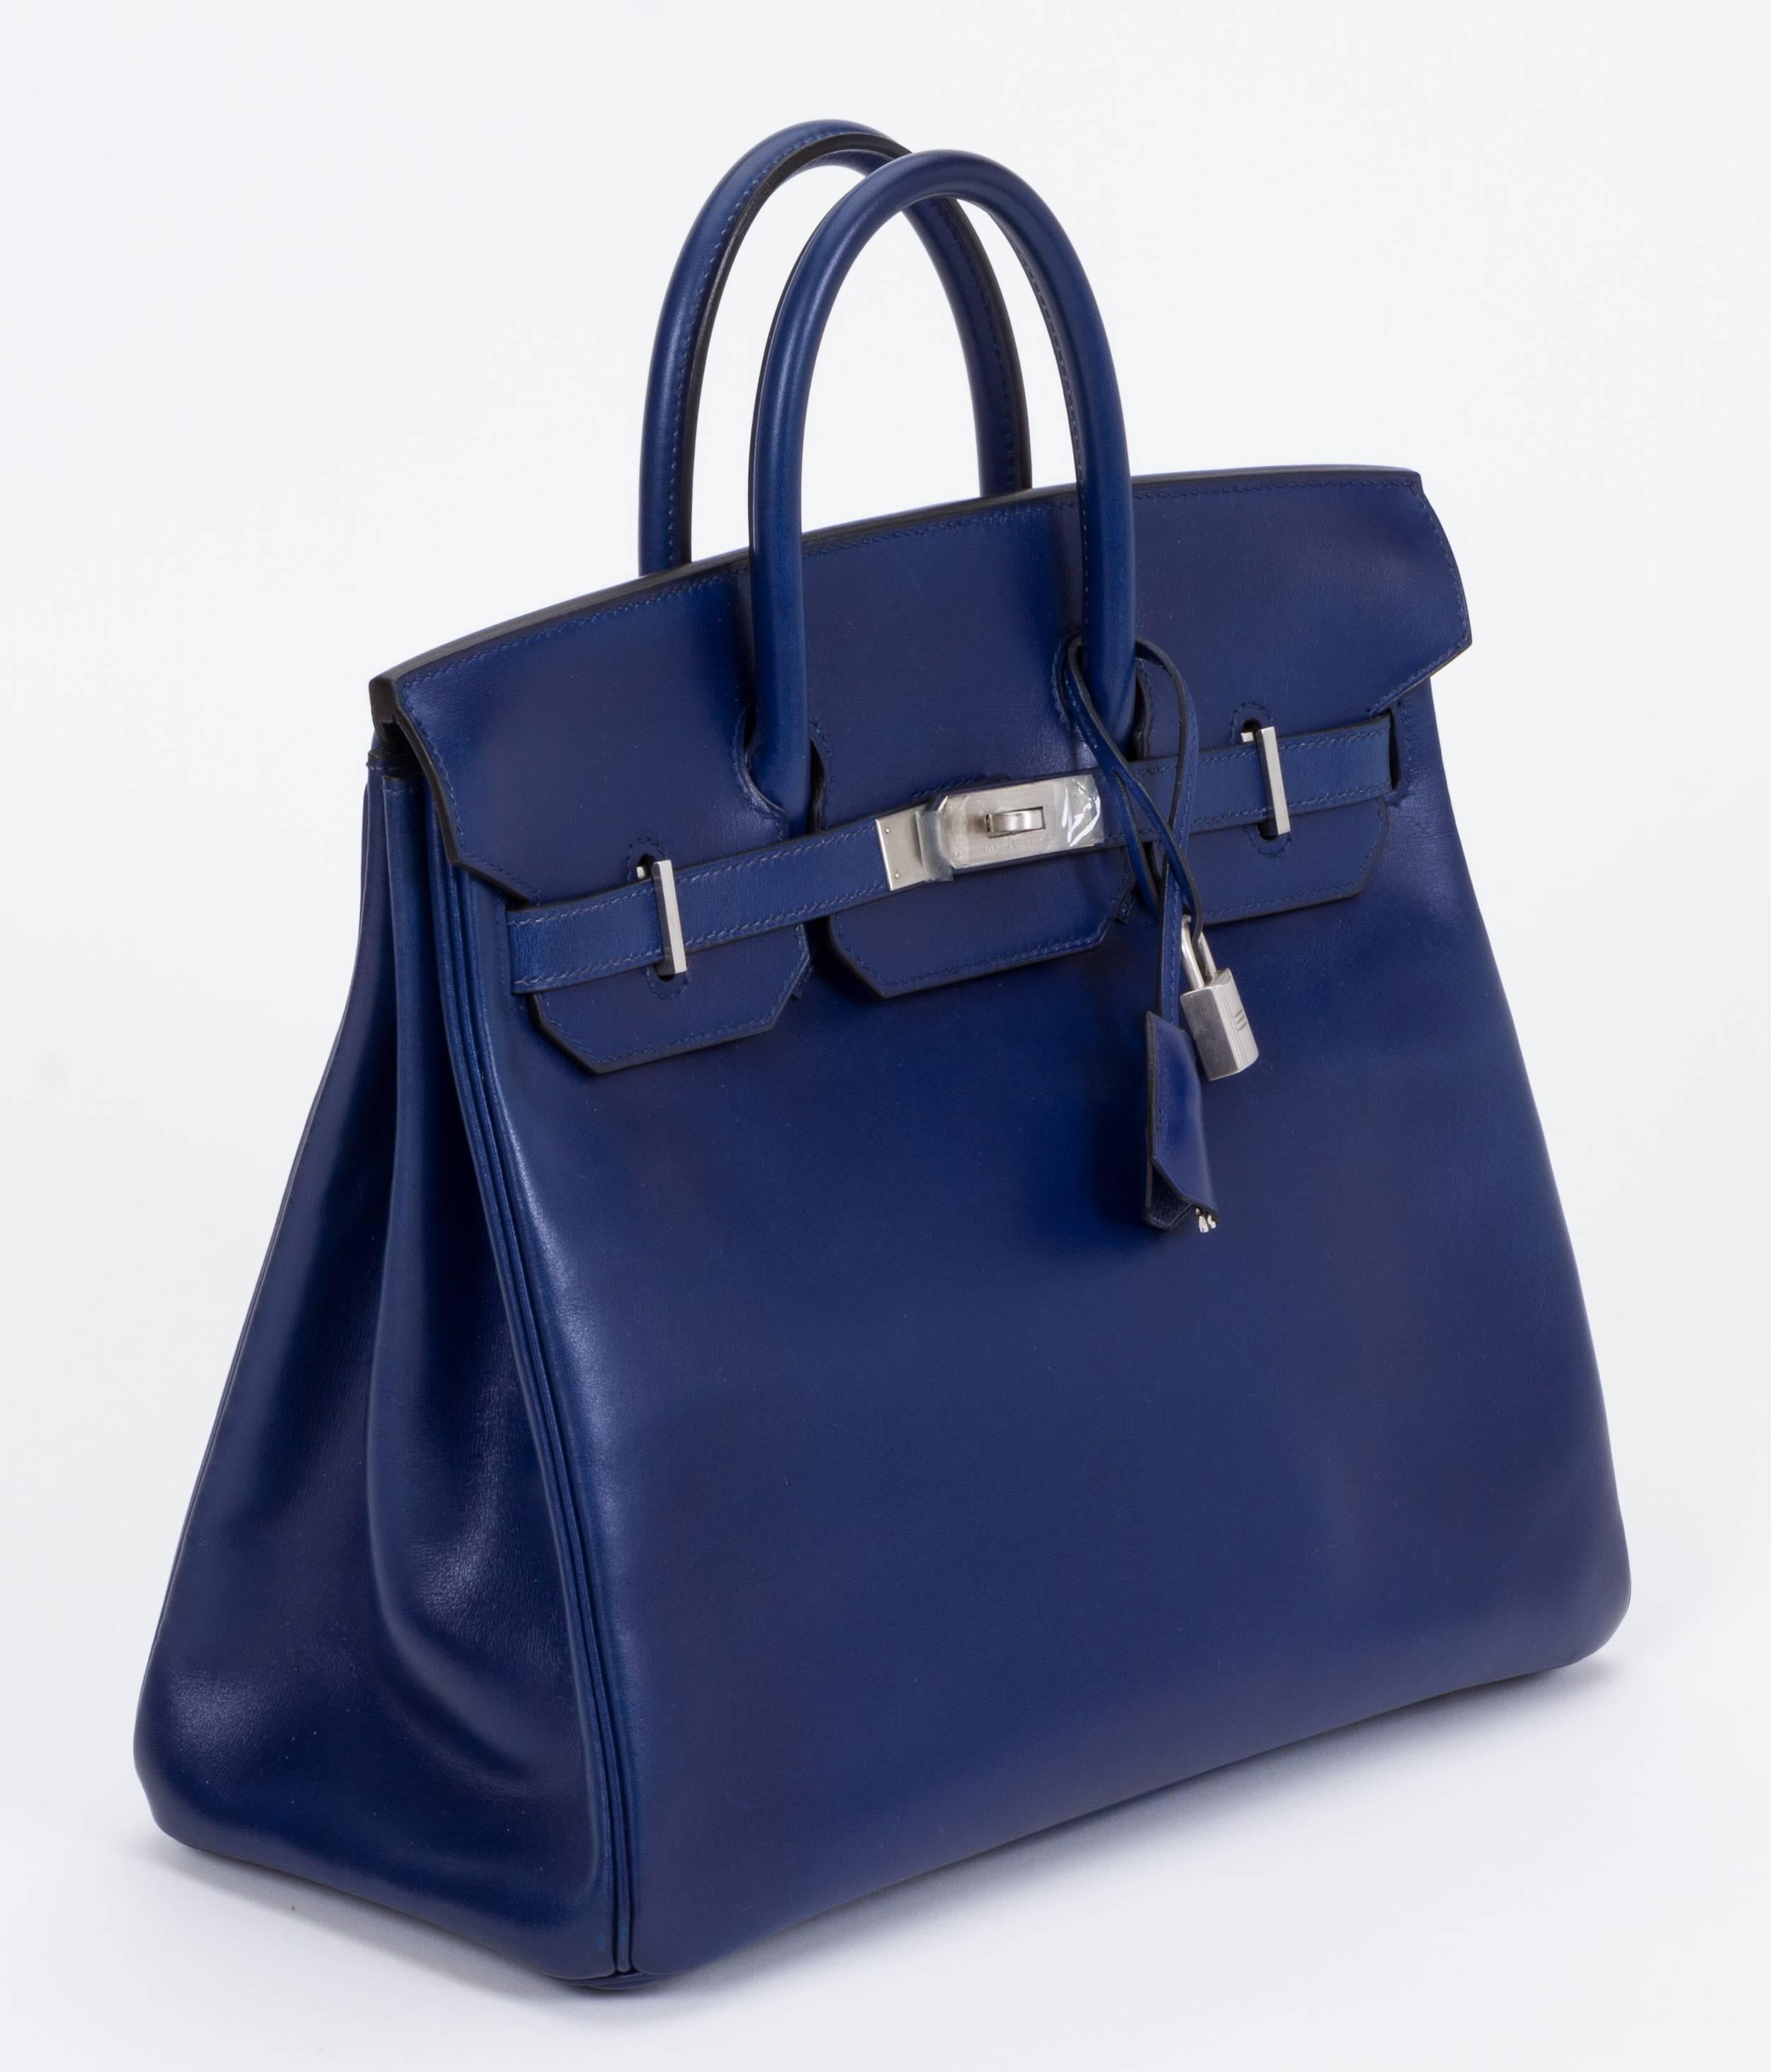 Hermès 32cm Birkin HAC bag. Box calf blue sapphire leather with brushed palladium hardware. Date stamp D for 2000. Handle drop, 3.5"L. Partial plastic still on hardware. Comes with original rain jacket and box. No duster
